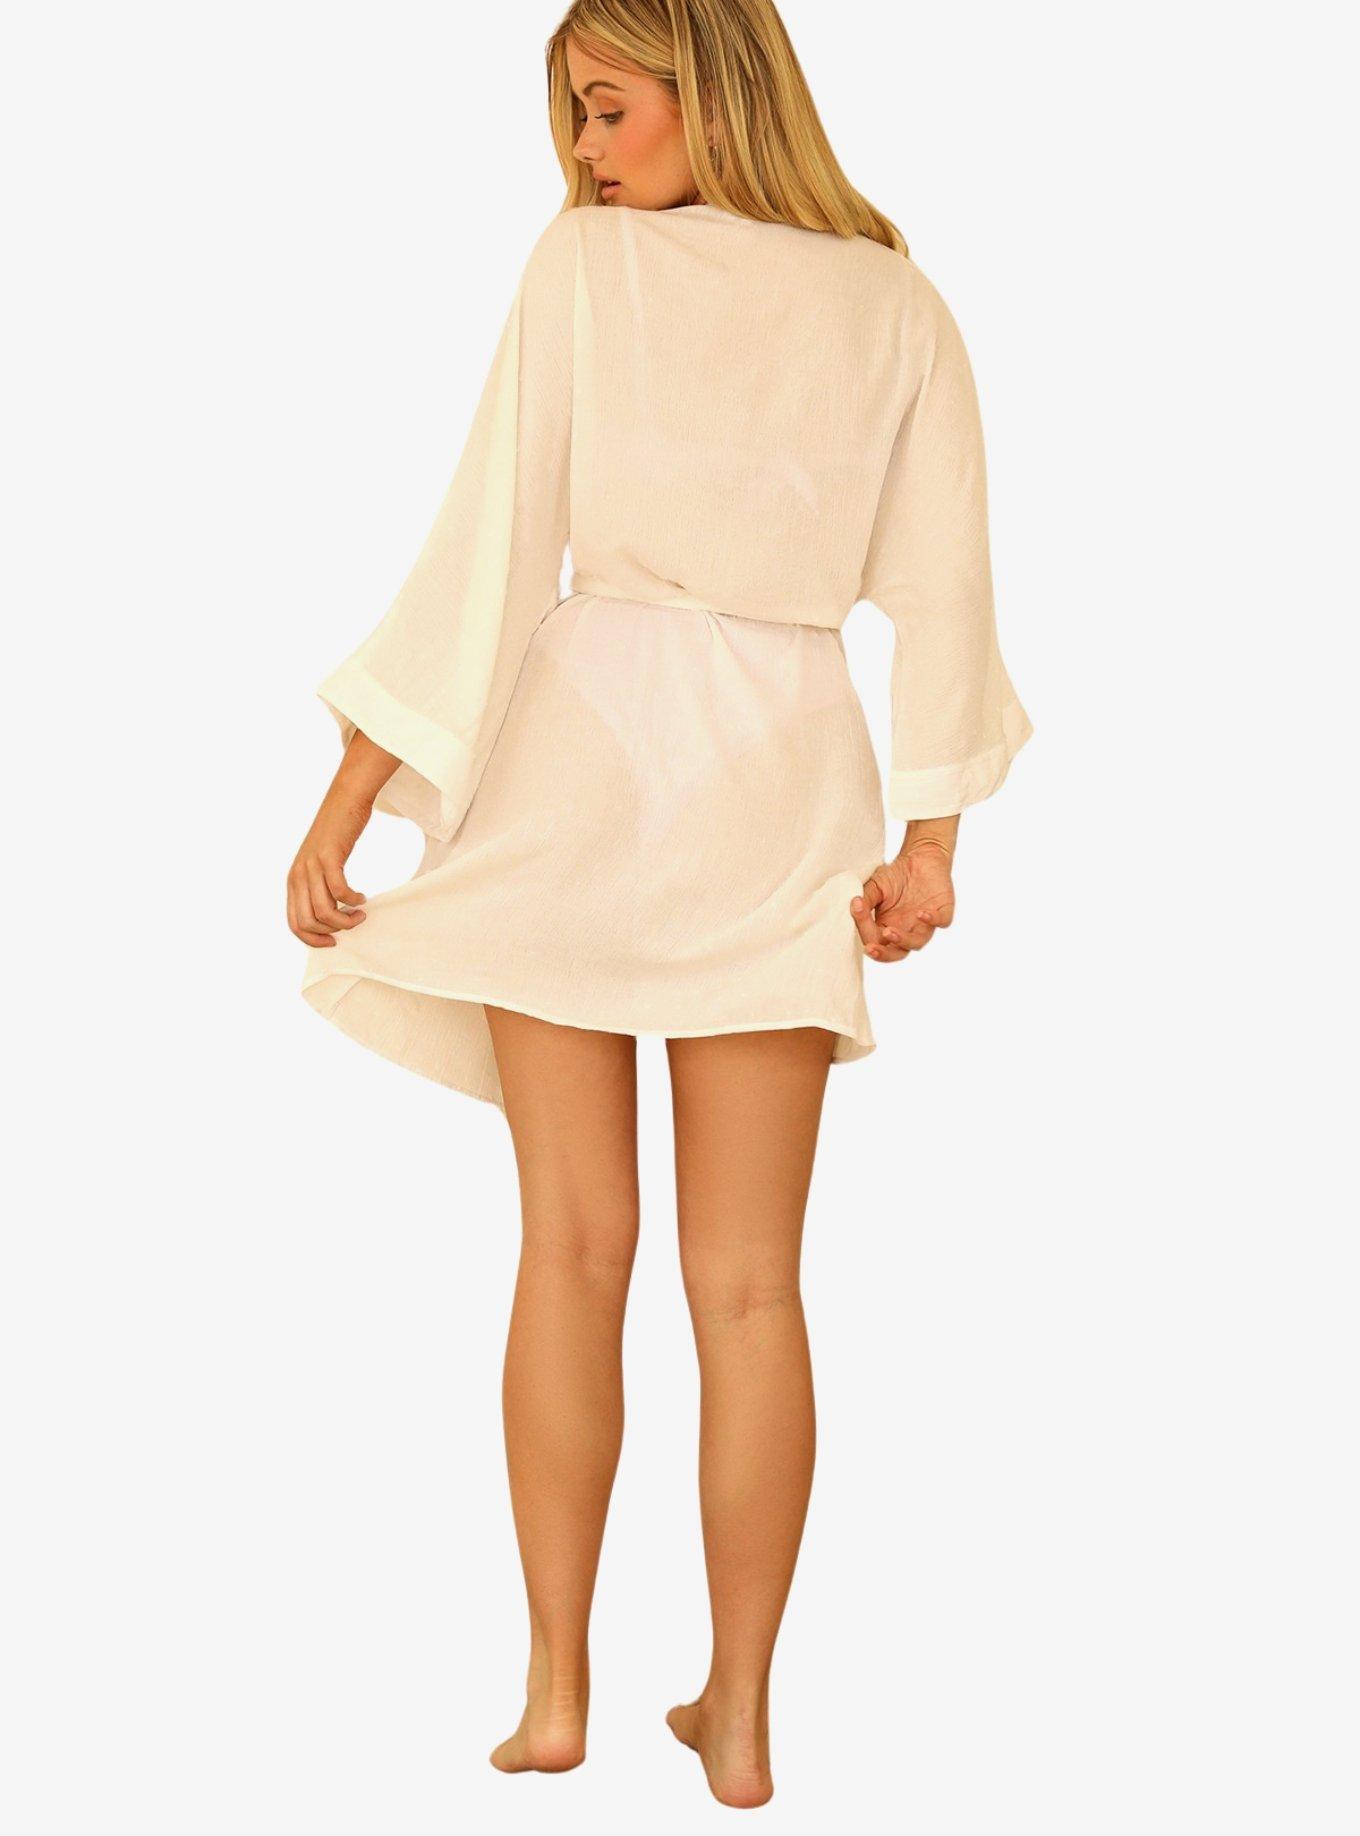 Dippin' Daisy's Marilyn Swim Cover-Up Robe Dotted Crepe, BEIGE, alternate